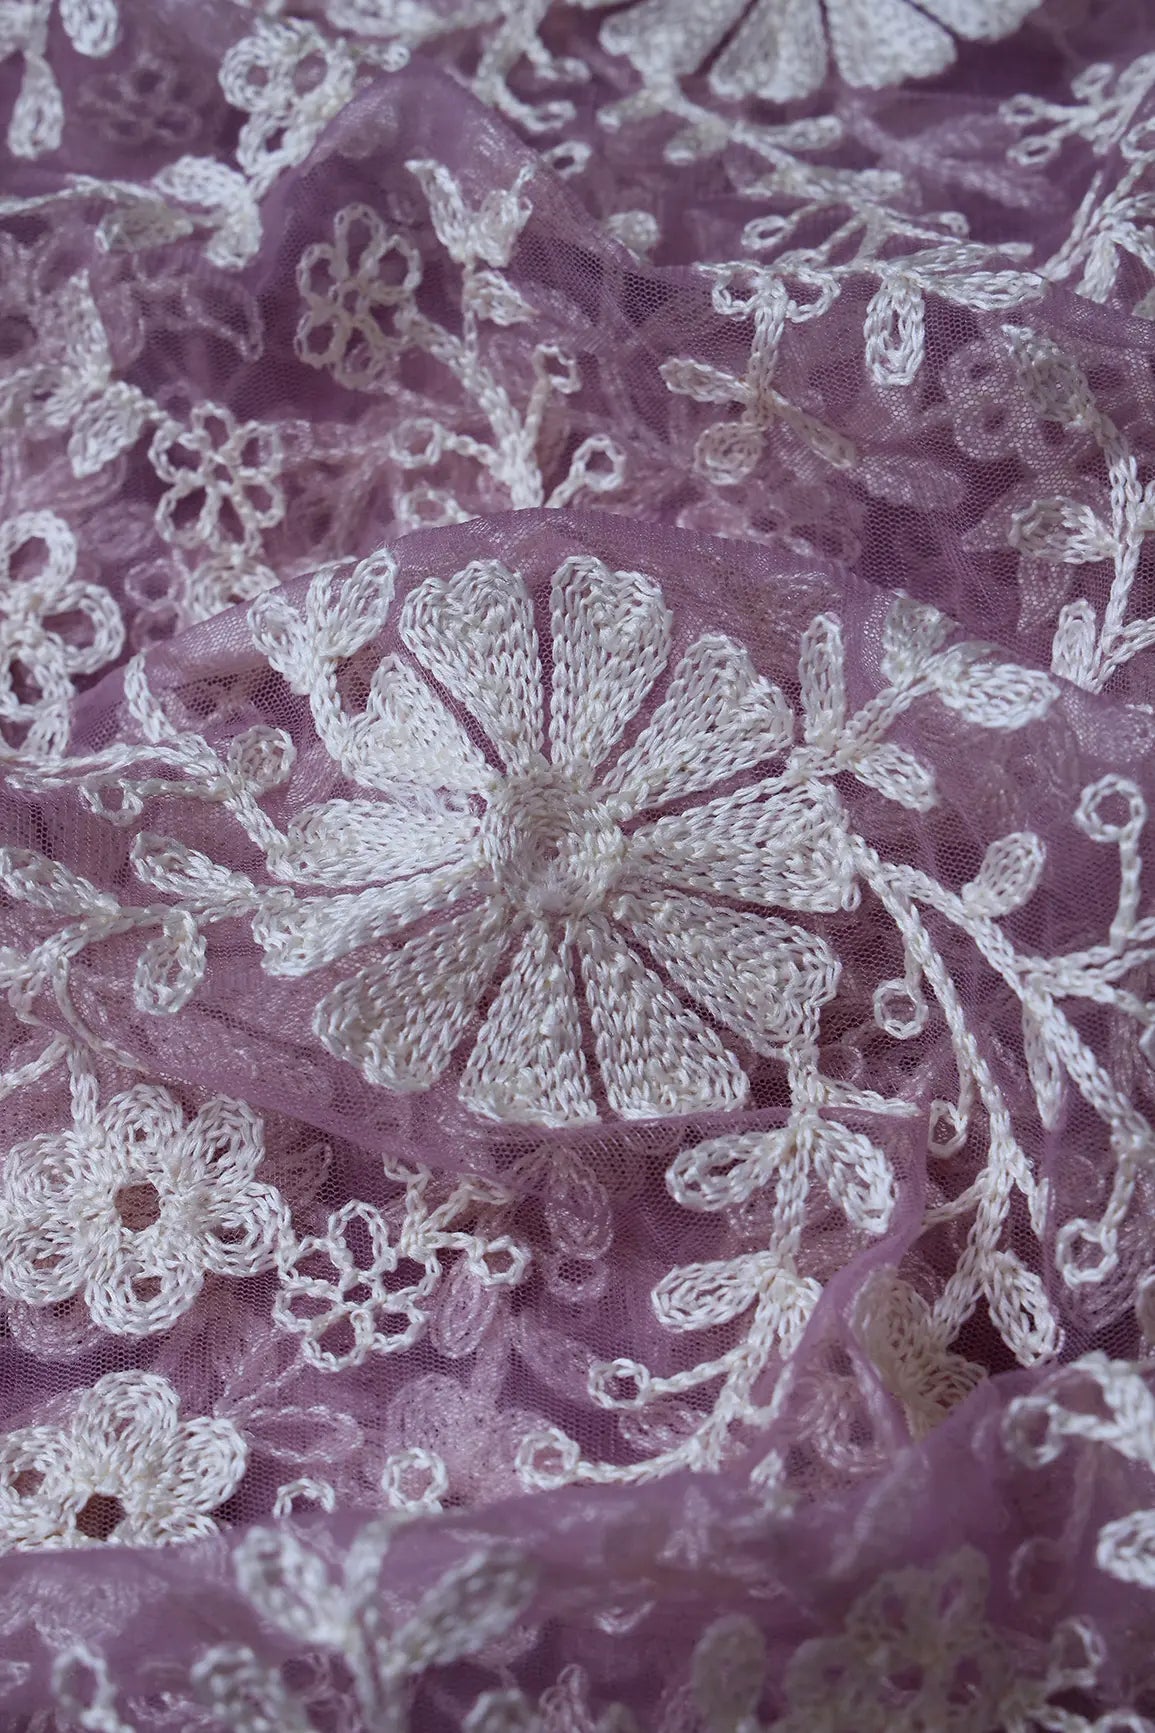 White Thread Heavy Floral Embroidery On Lilac Purple Soft Net Fabric - doeraa